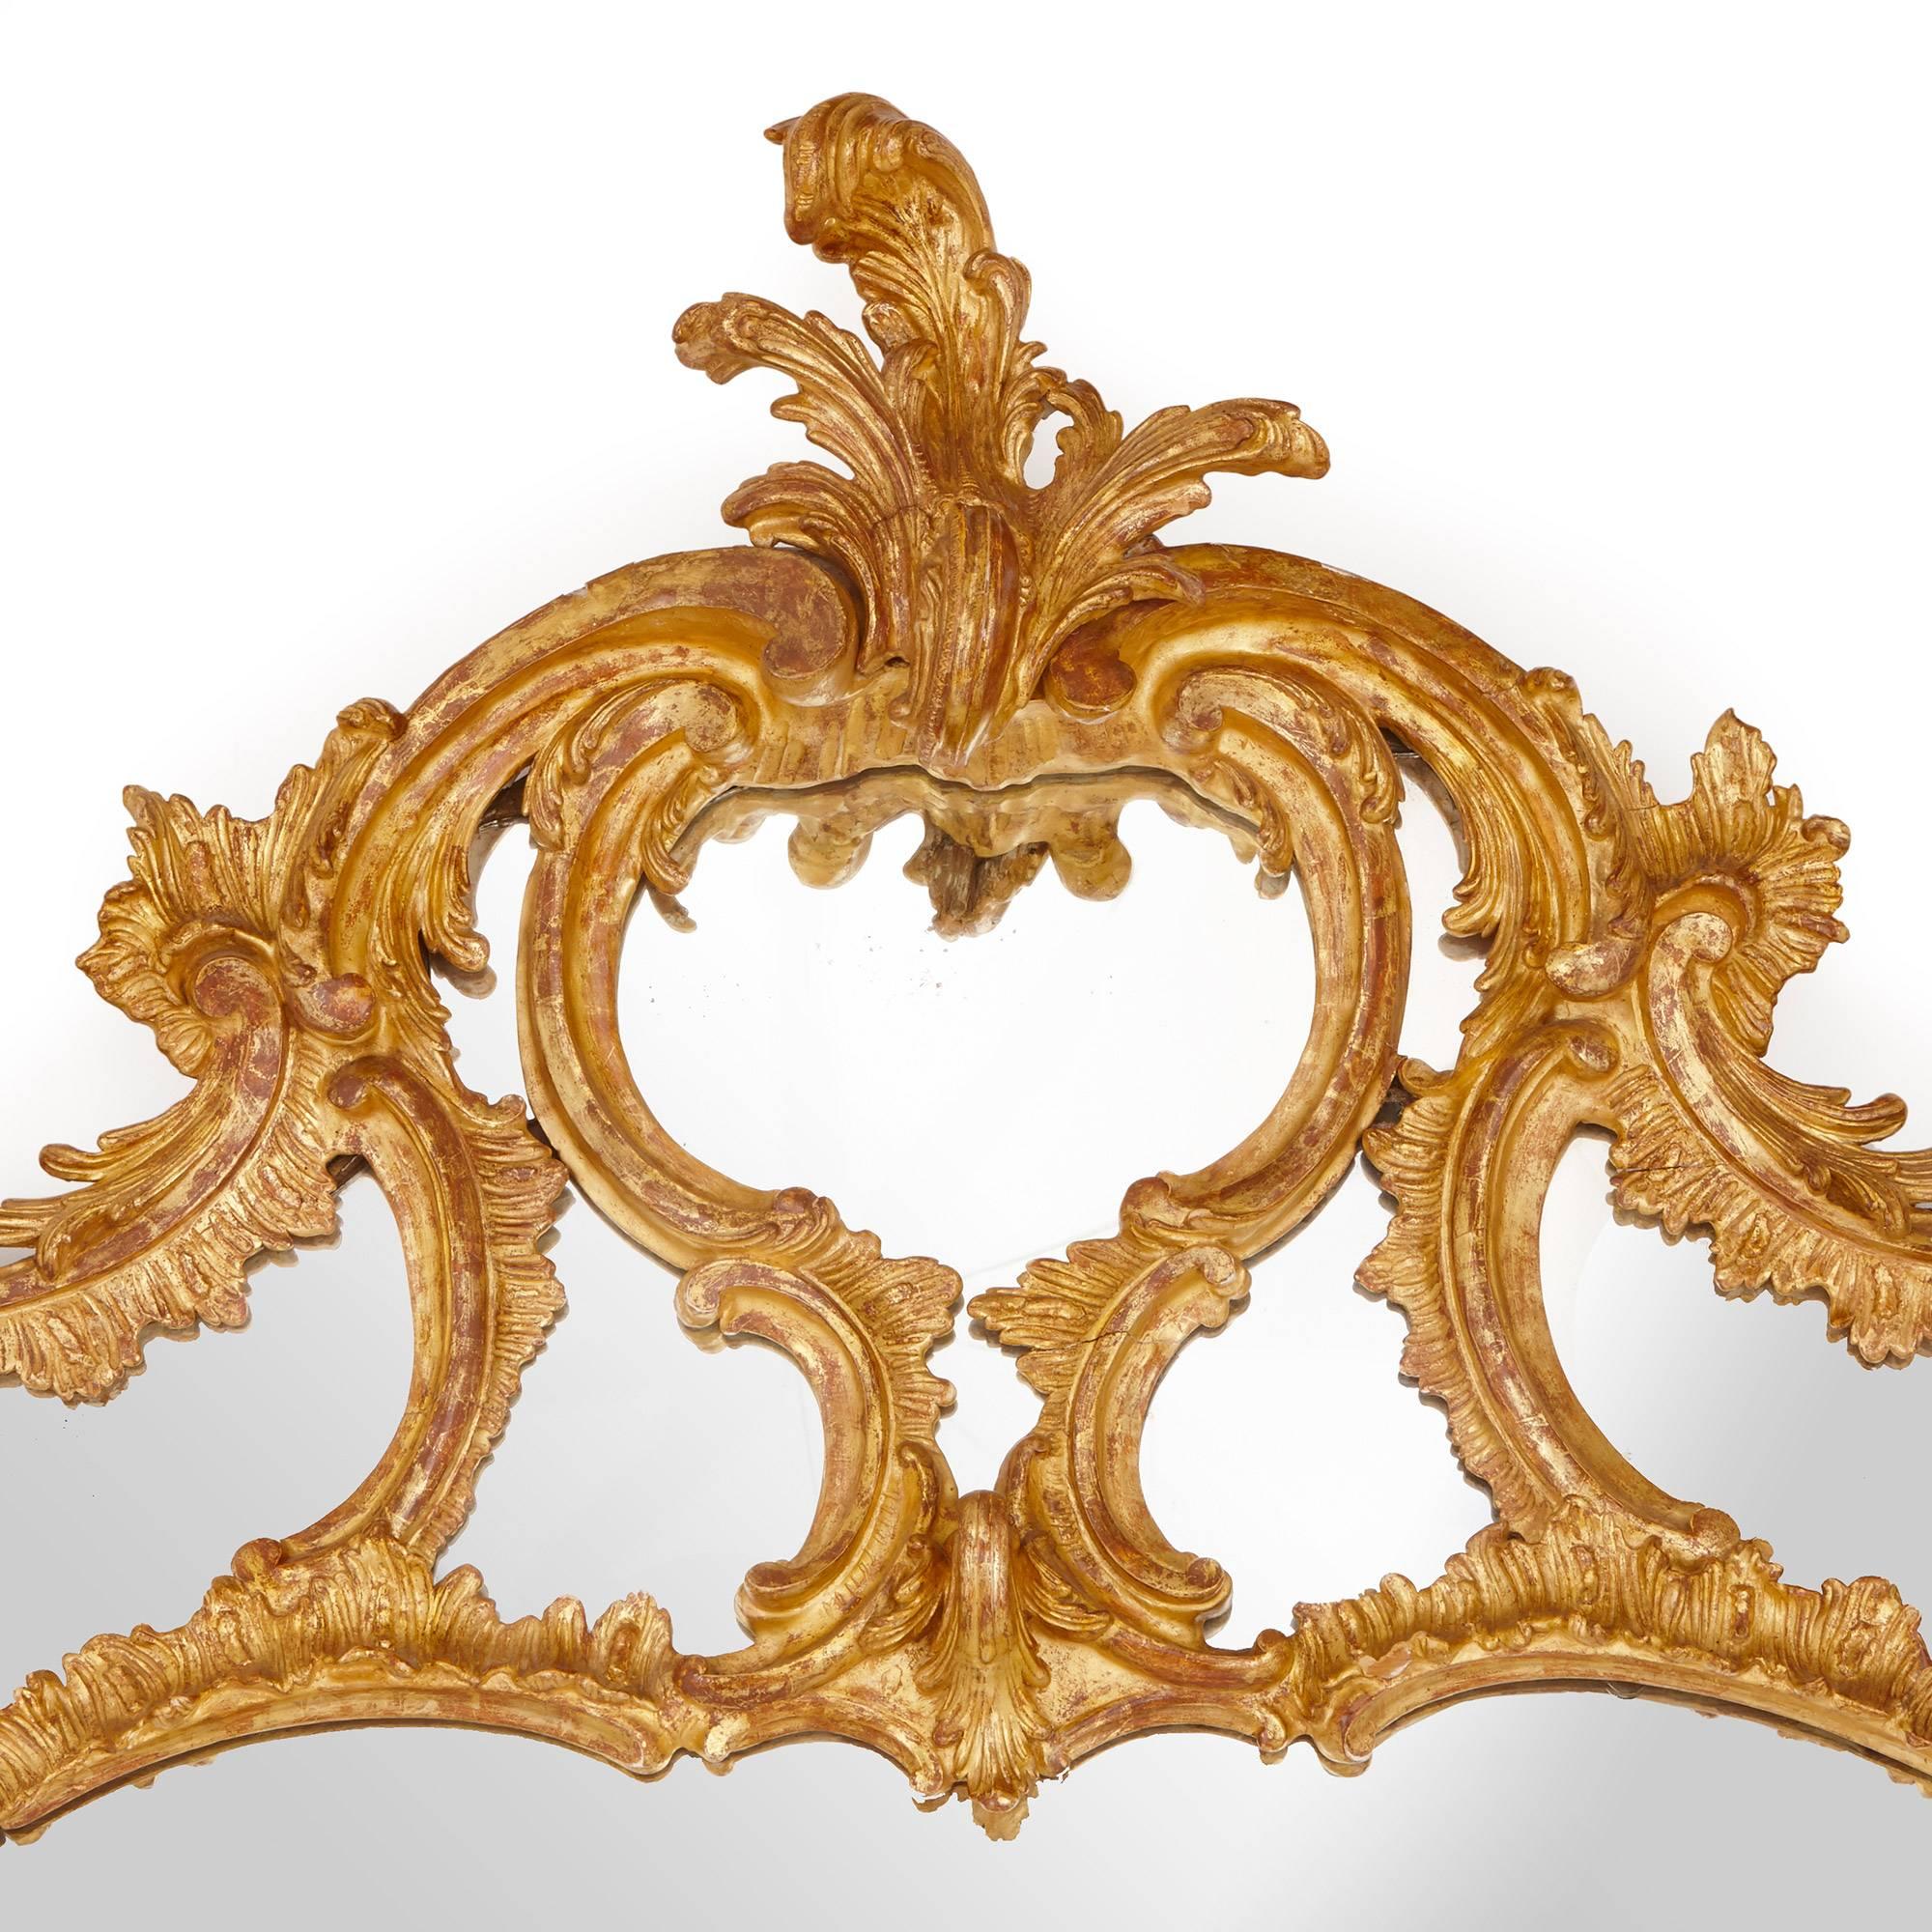 Carved Pair of Large English Antique Giltwood Wall Mirrors in the Rococo Style